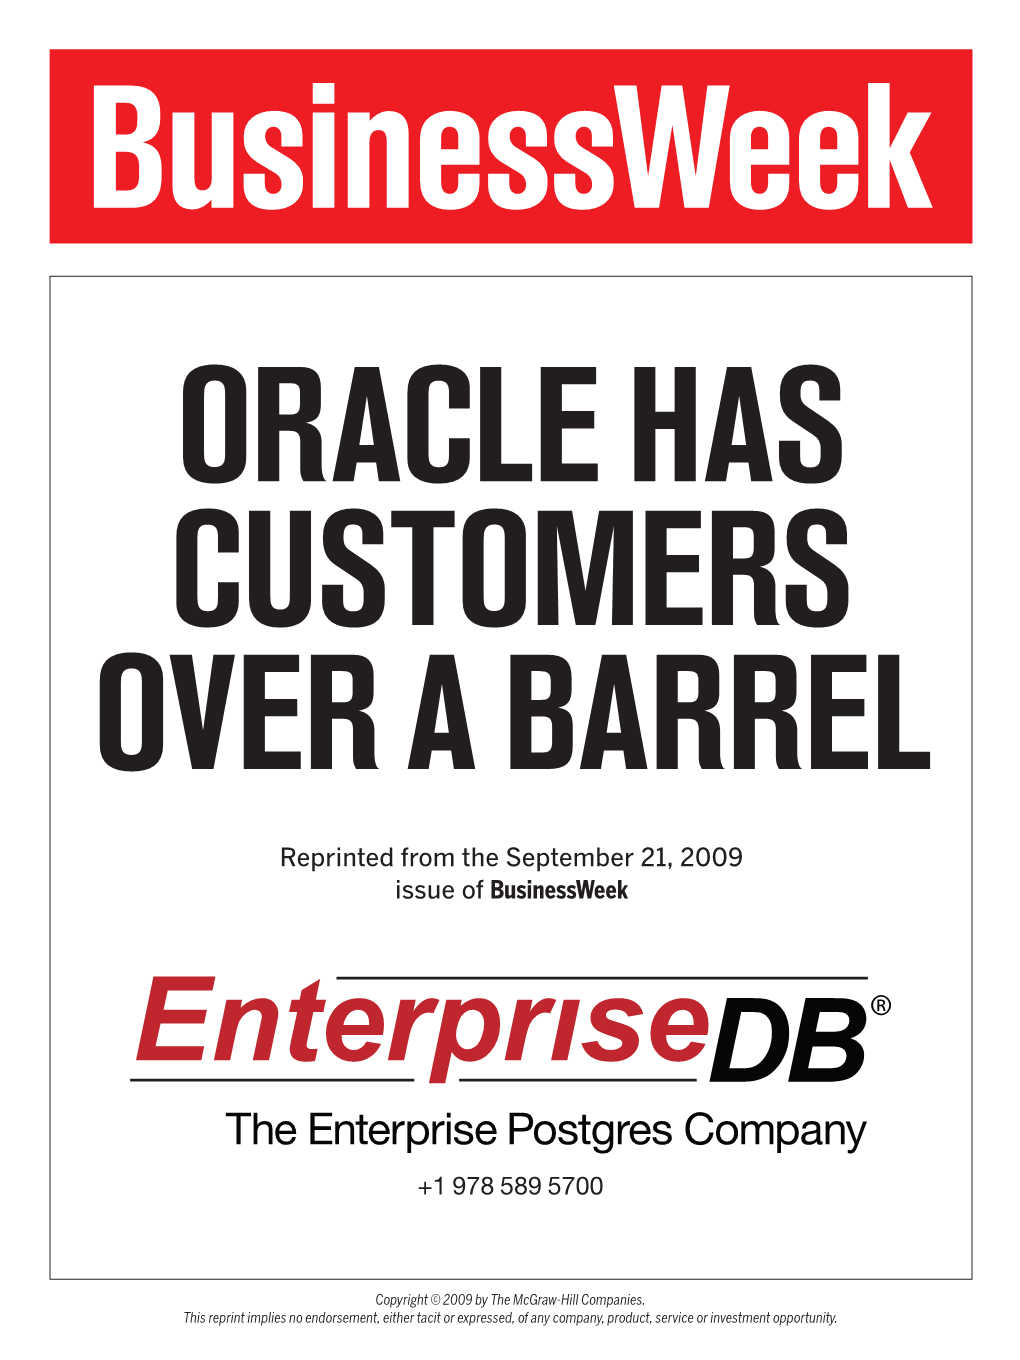 Oracle Has Customers Over a Barrel